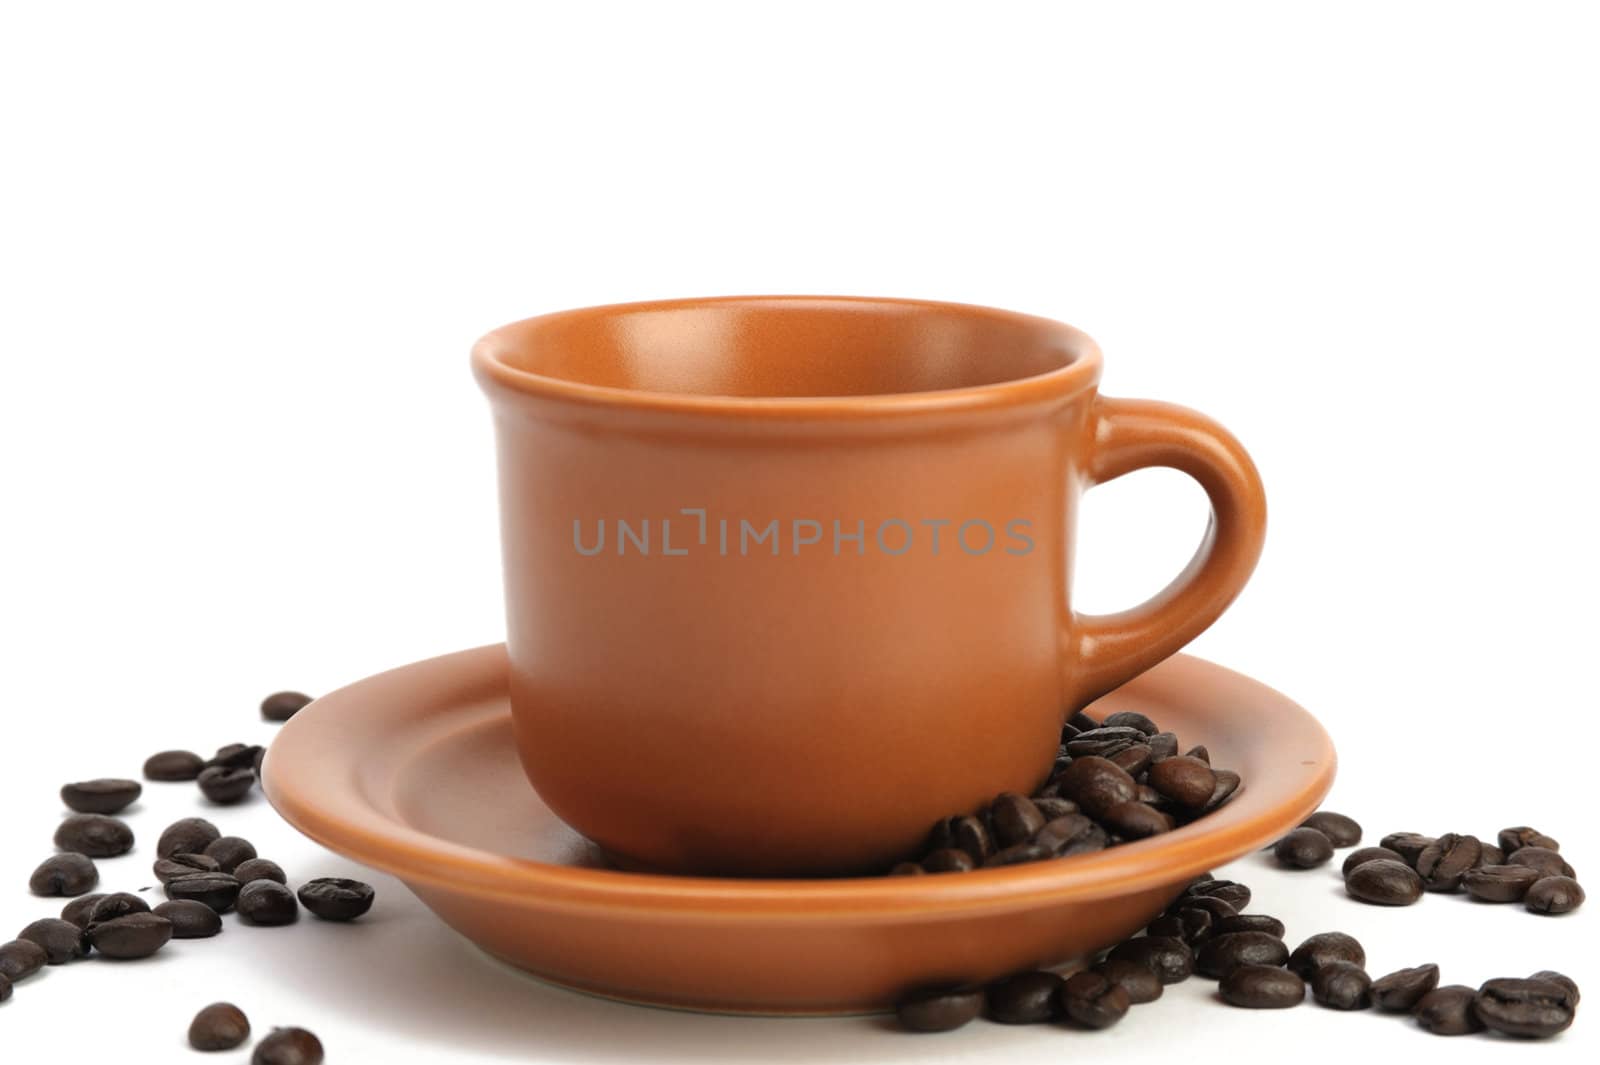 An image of a cup and a saucer with coffee beans